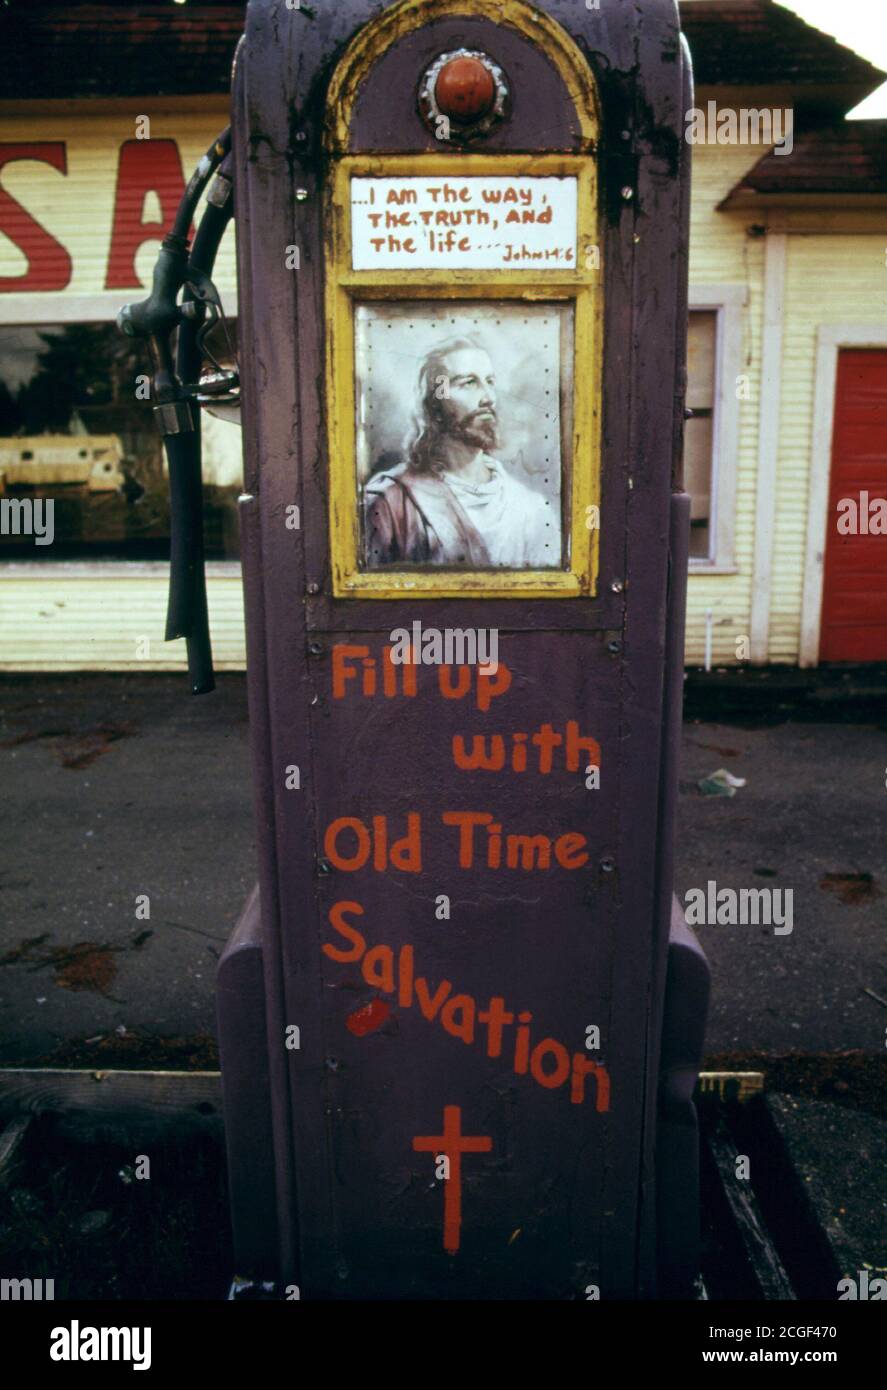 Gasoline Stations Abandoned During the Fuel Crisis in the Winter of 1973-74 Were Sometimes Used for Other Purposes. This Station at Potlatch, Washington, West of Olympia Was Turned Into a Religious Meeting Hall. A Sign Painted on the Gas Pump Proclaimed 'Fill Up with Old Time Salvation.' 04/1974 Stock Photo